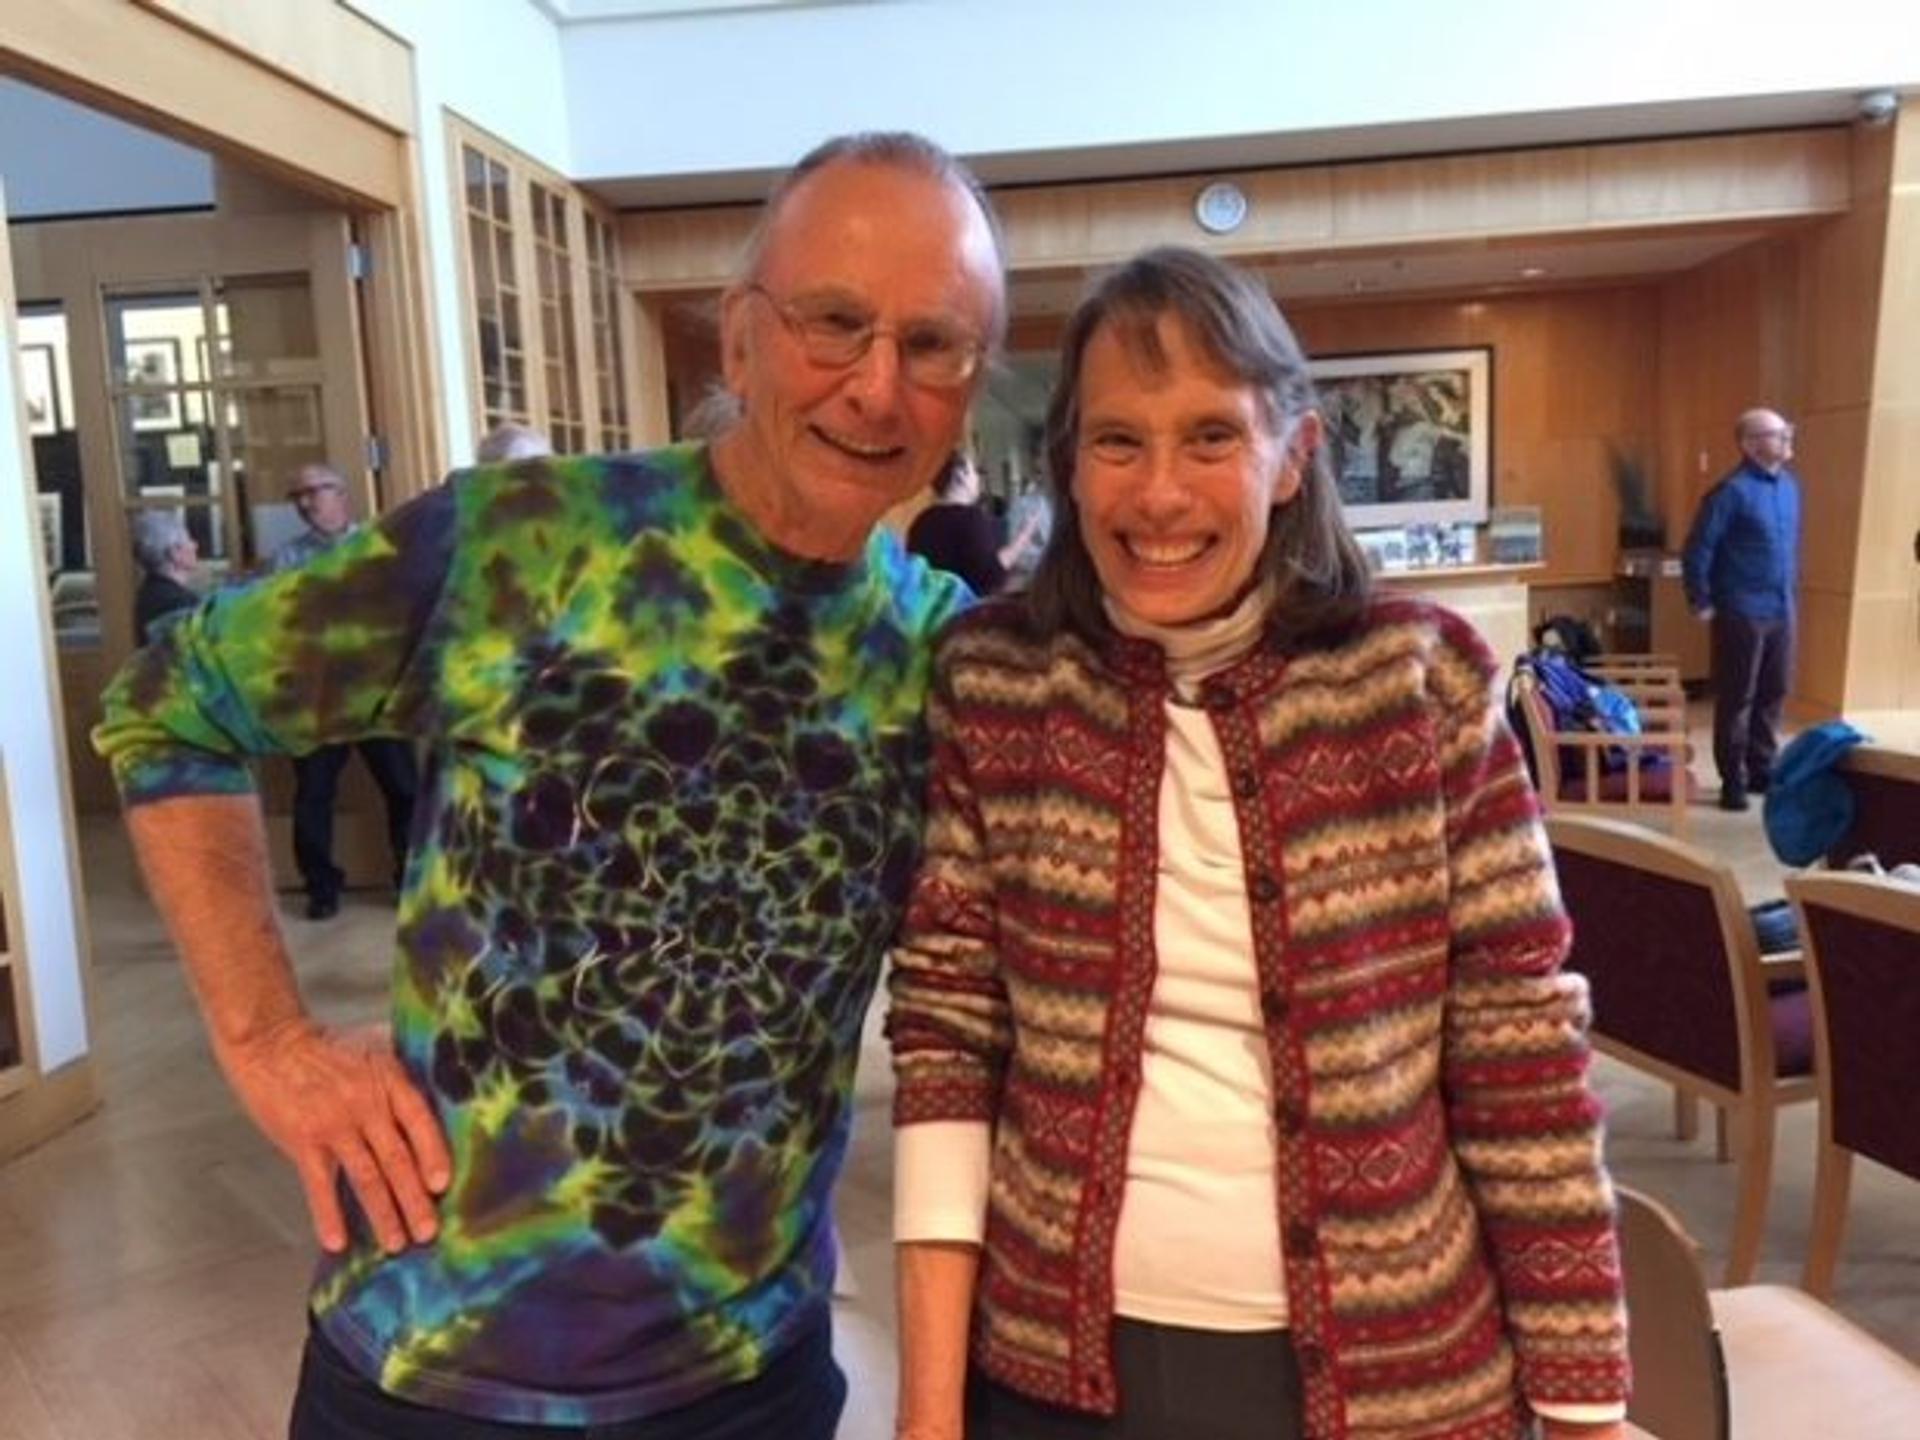 Harry MacCormack wears a tie dyed shirt and smiles with Lynn Coody in what looks like the meeting room of a library.